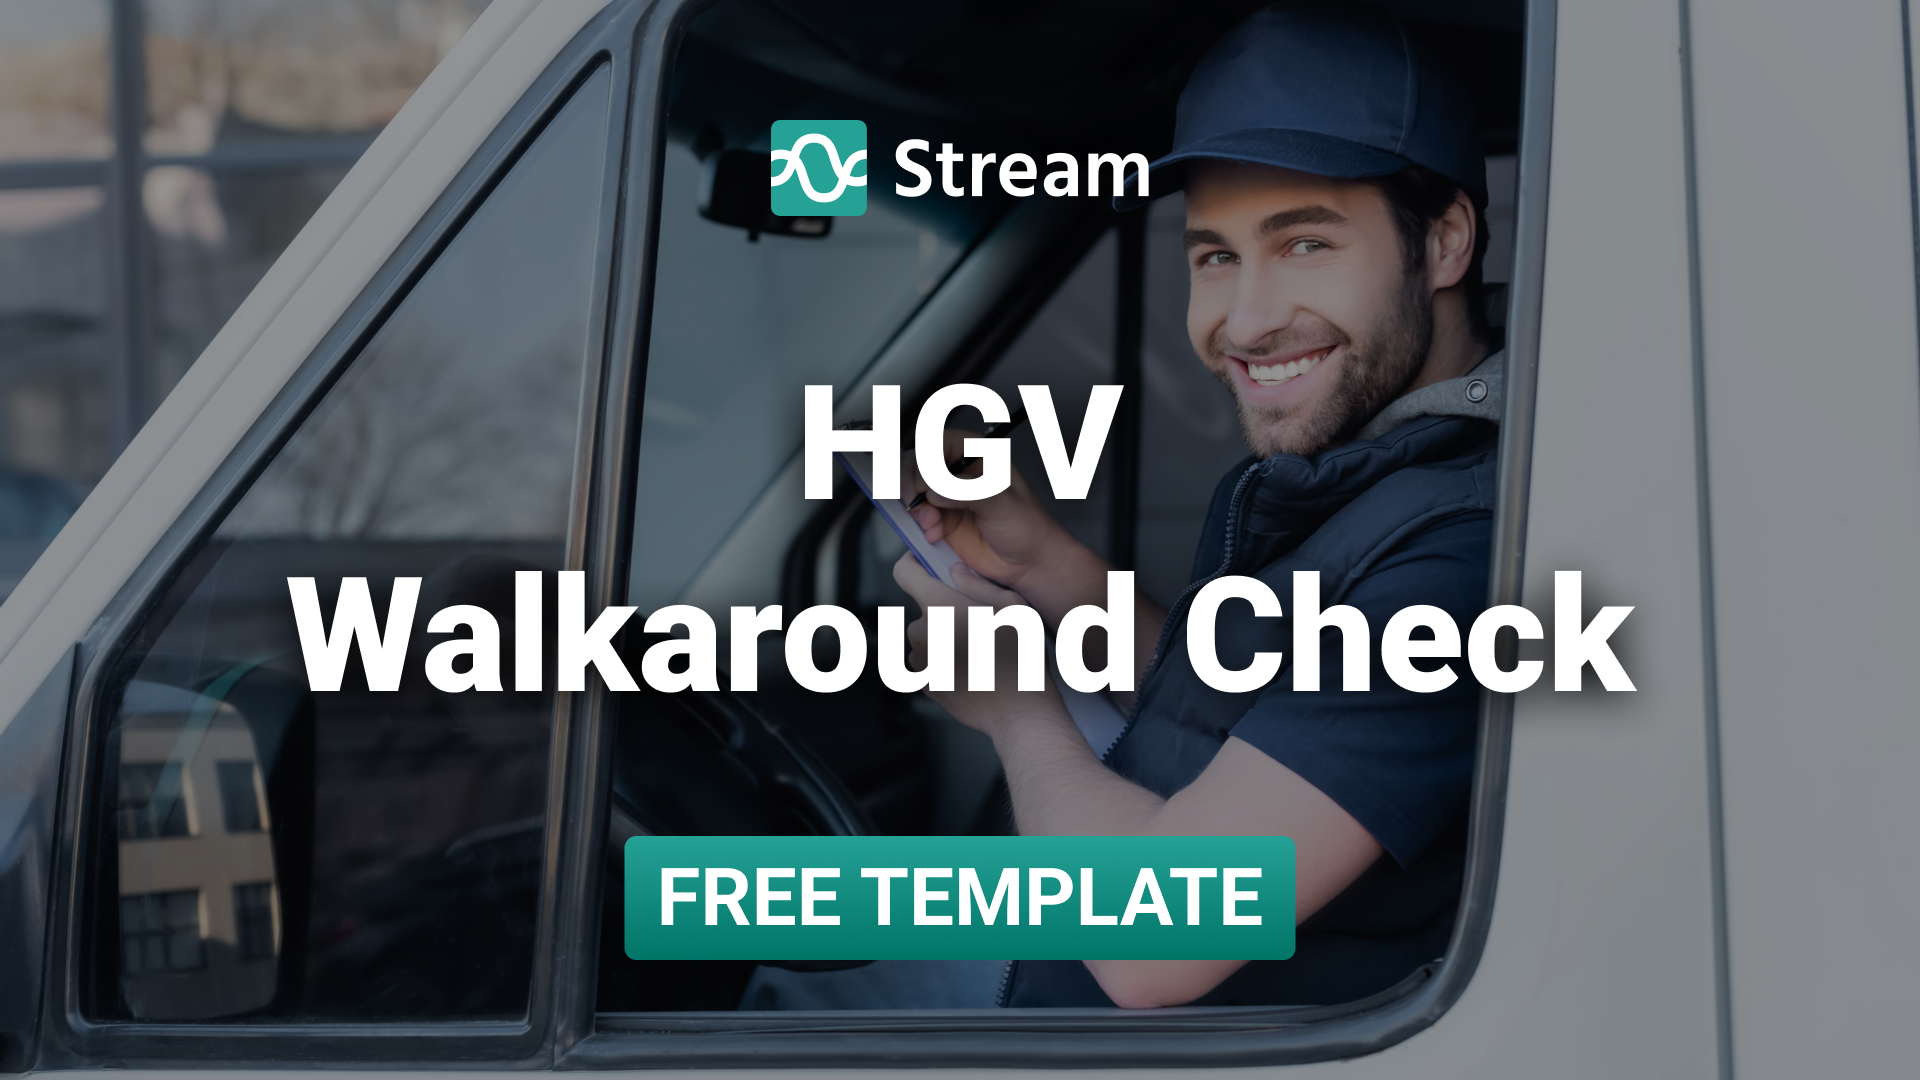 HGV-Walkaround-Check-Template-FREE-Download-Featured-Image